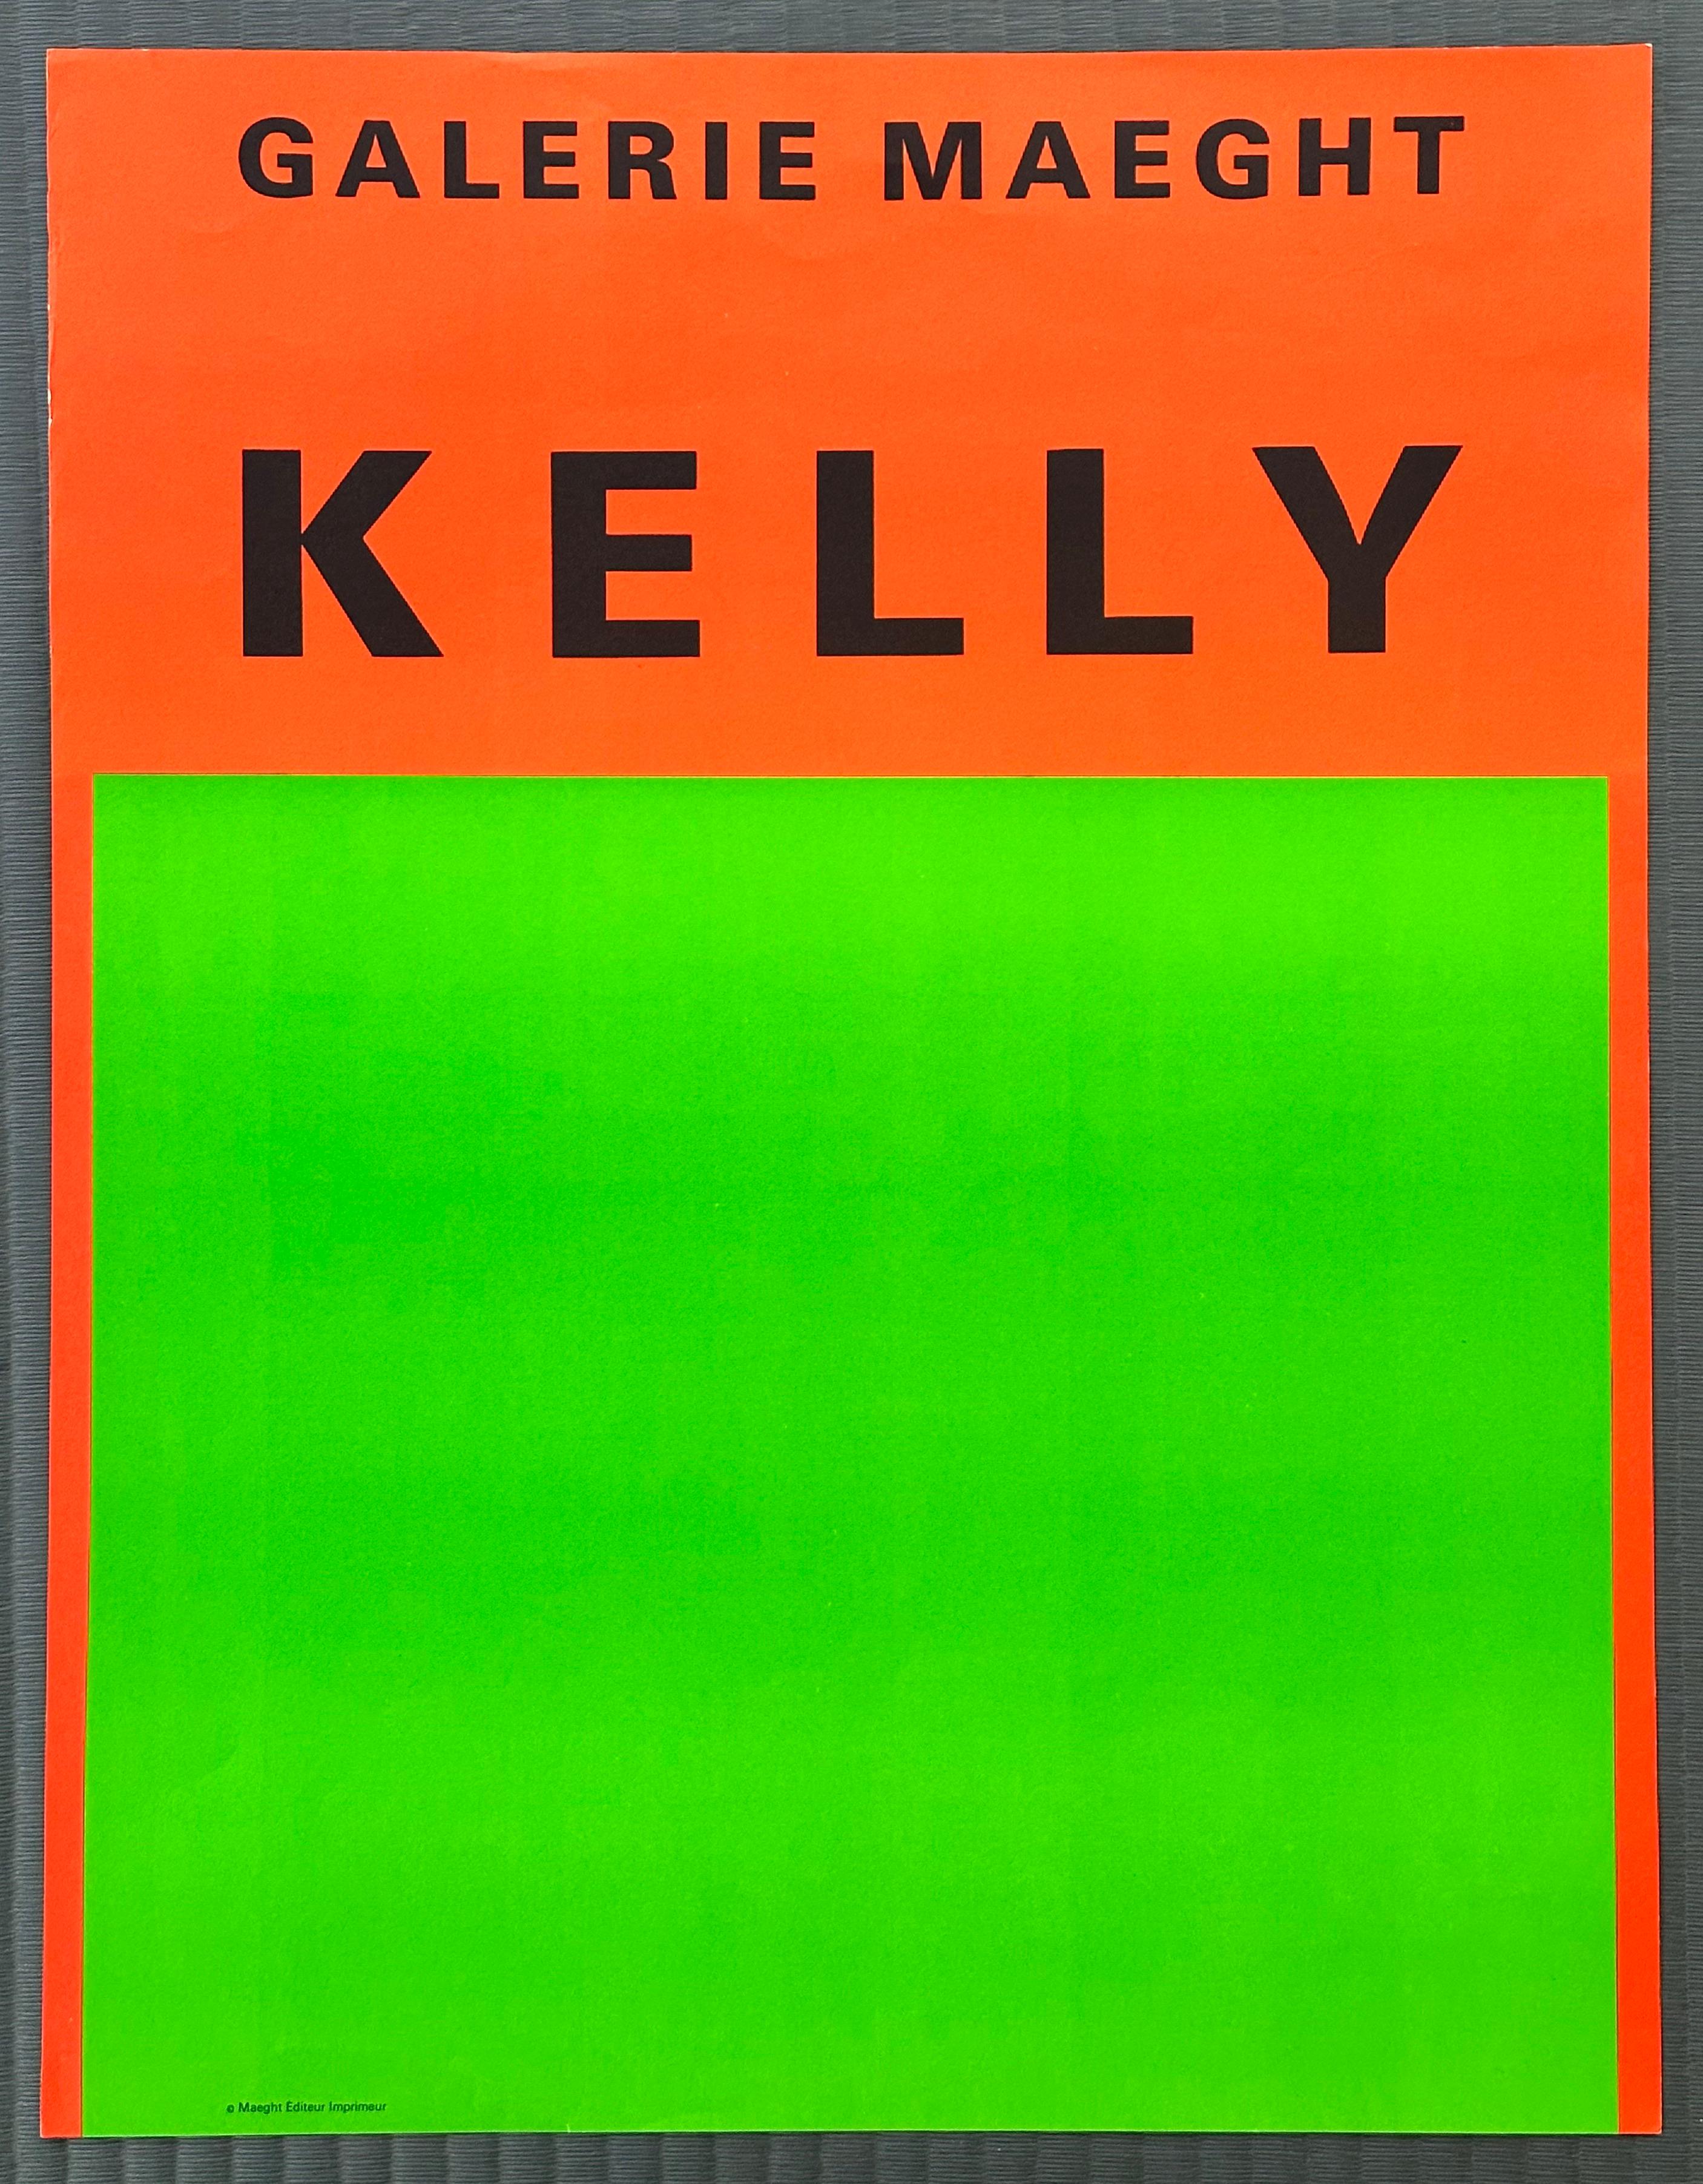 Ellsworth Kelly Abstract Print - Exhibition Poster